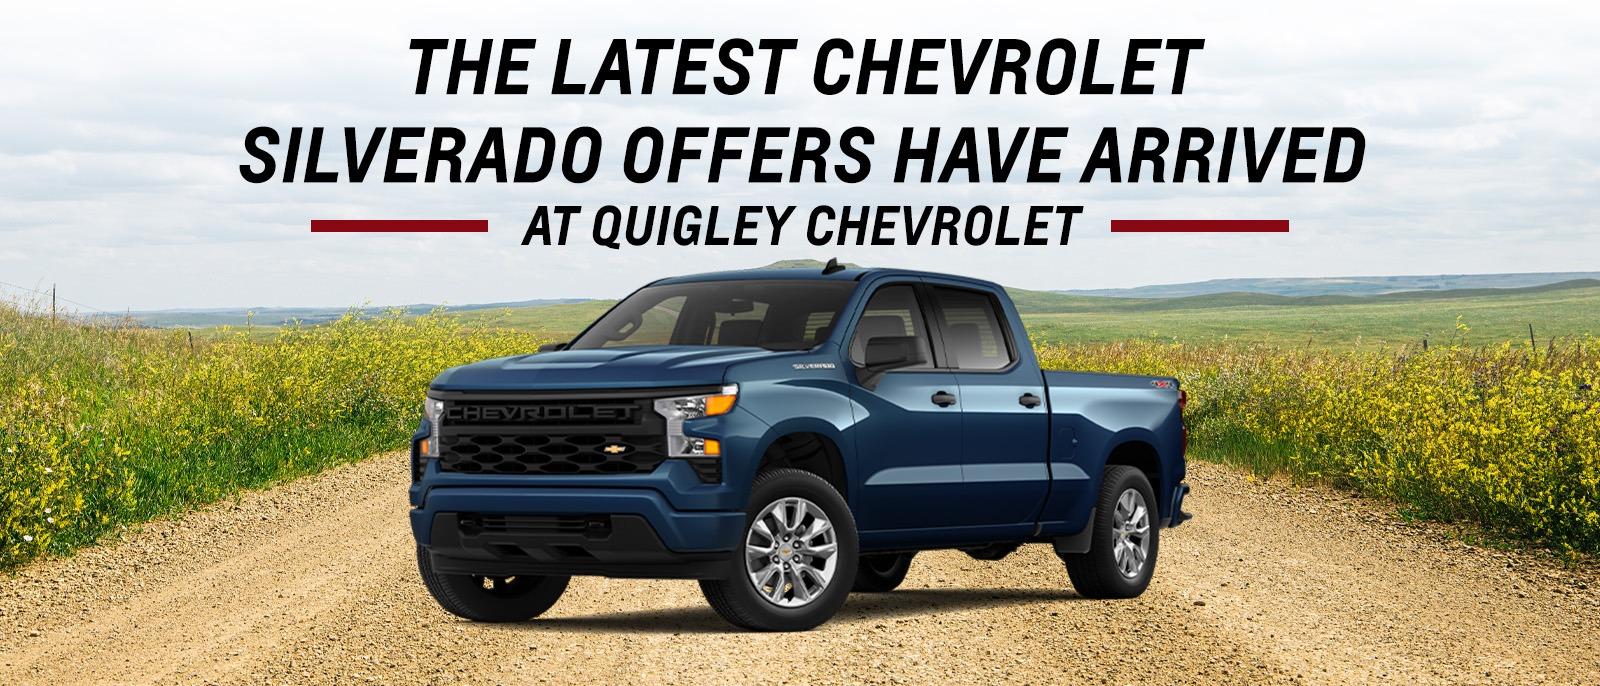 THE LATEST CHEVROLET SILVERADO OFFERS HAVE ARRIVED AT QUIGLEY CHEVROLET SPRING